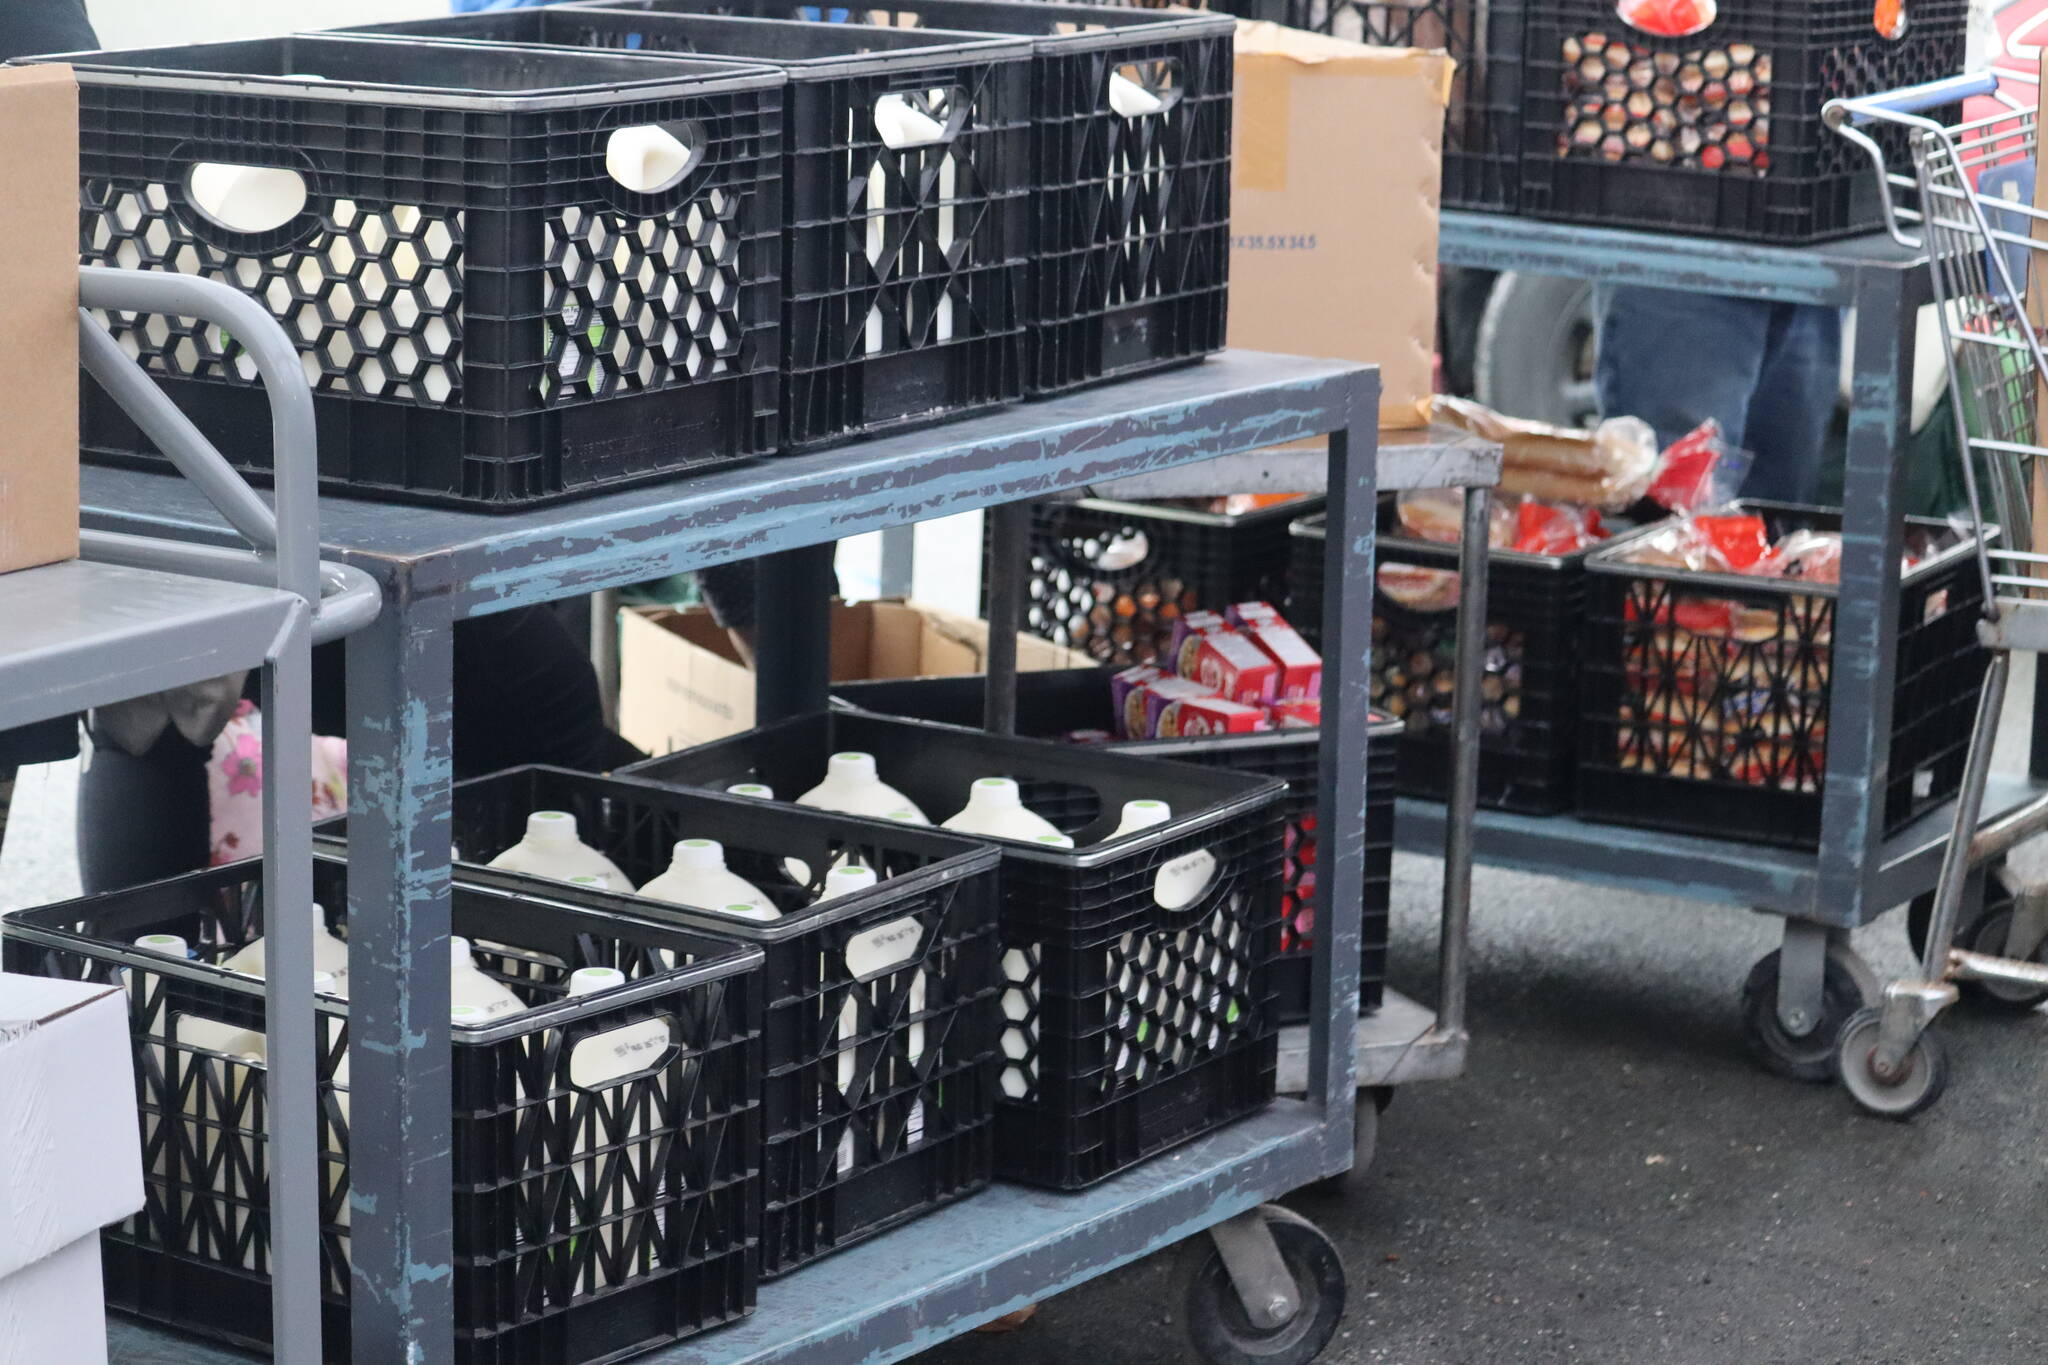 Not only do members of the Juneau community rely on Southeast Alaska Food Bank for food supplies such as milk and bread as seen in this picture, but so do various organizations such as the Resurrection Church, who are also facing higher demands of their own. (Jonson Kuhn / Juneau Empire)